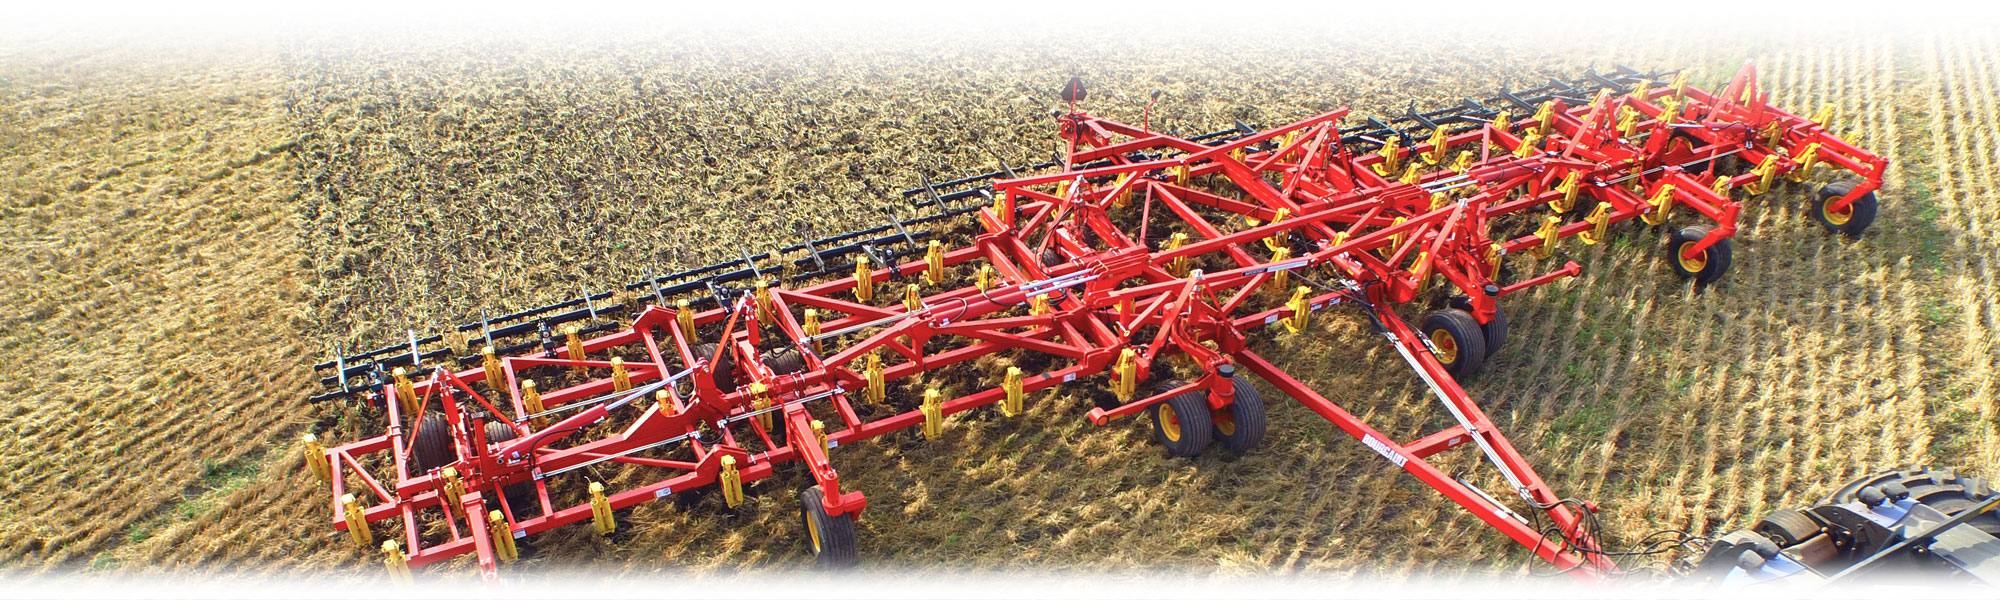 9500 Floating Hitch Chisel Plow